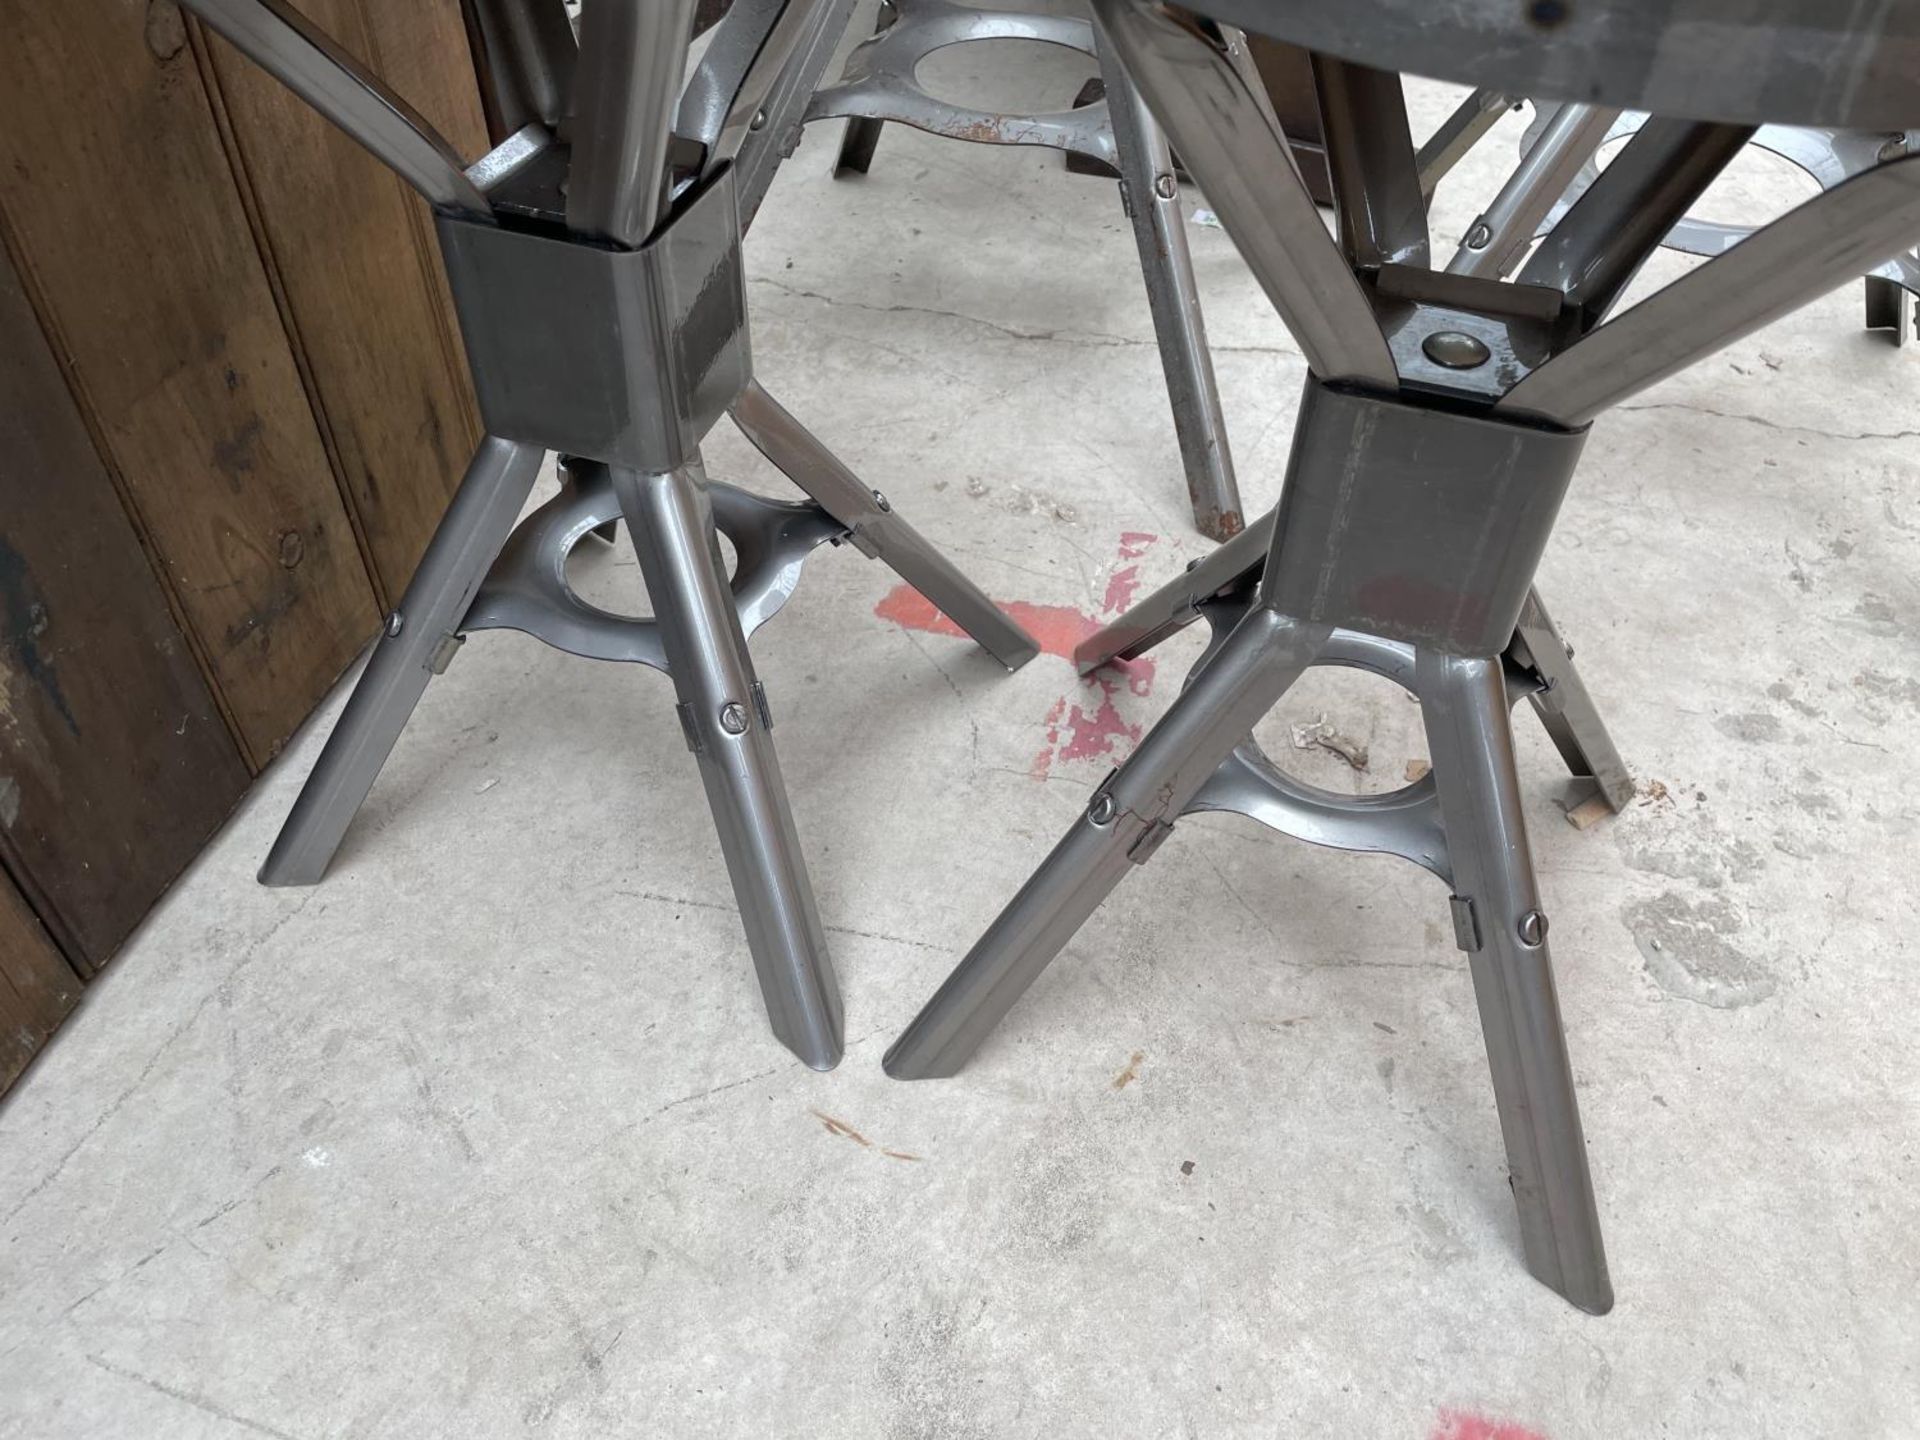 TWO LOW POLISHED METAL INDUSTRIAL STYLE STOOLS H: 18 INCHES - Image 3 of 3